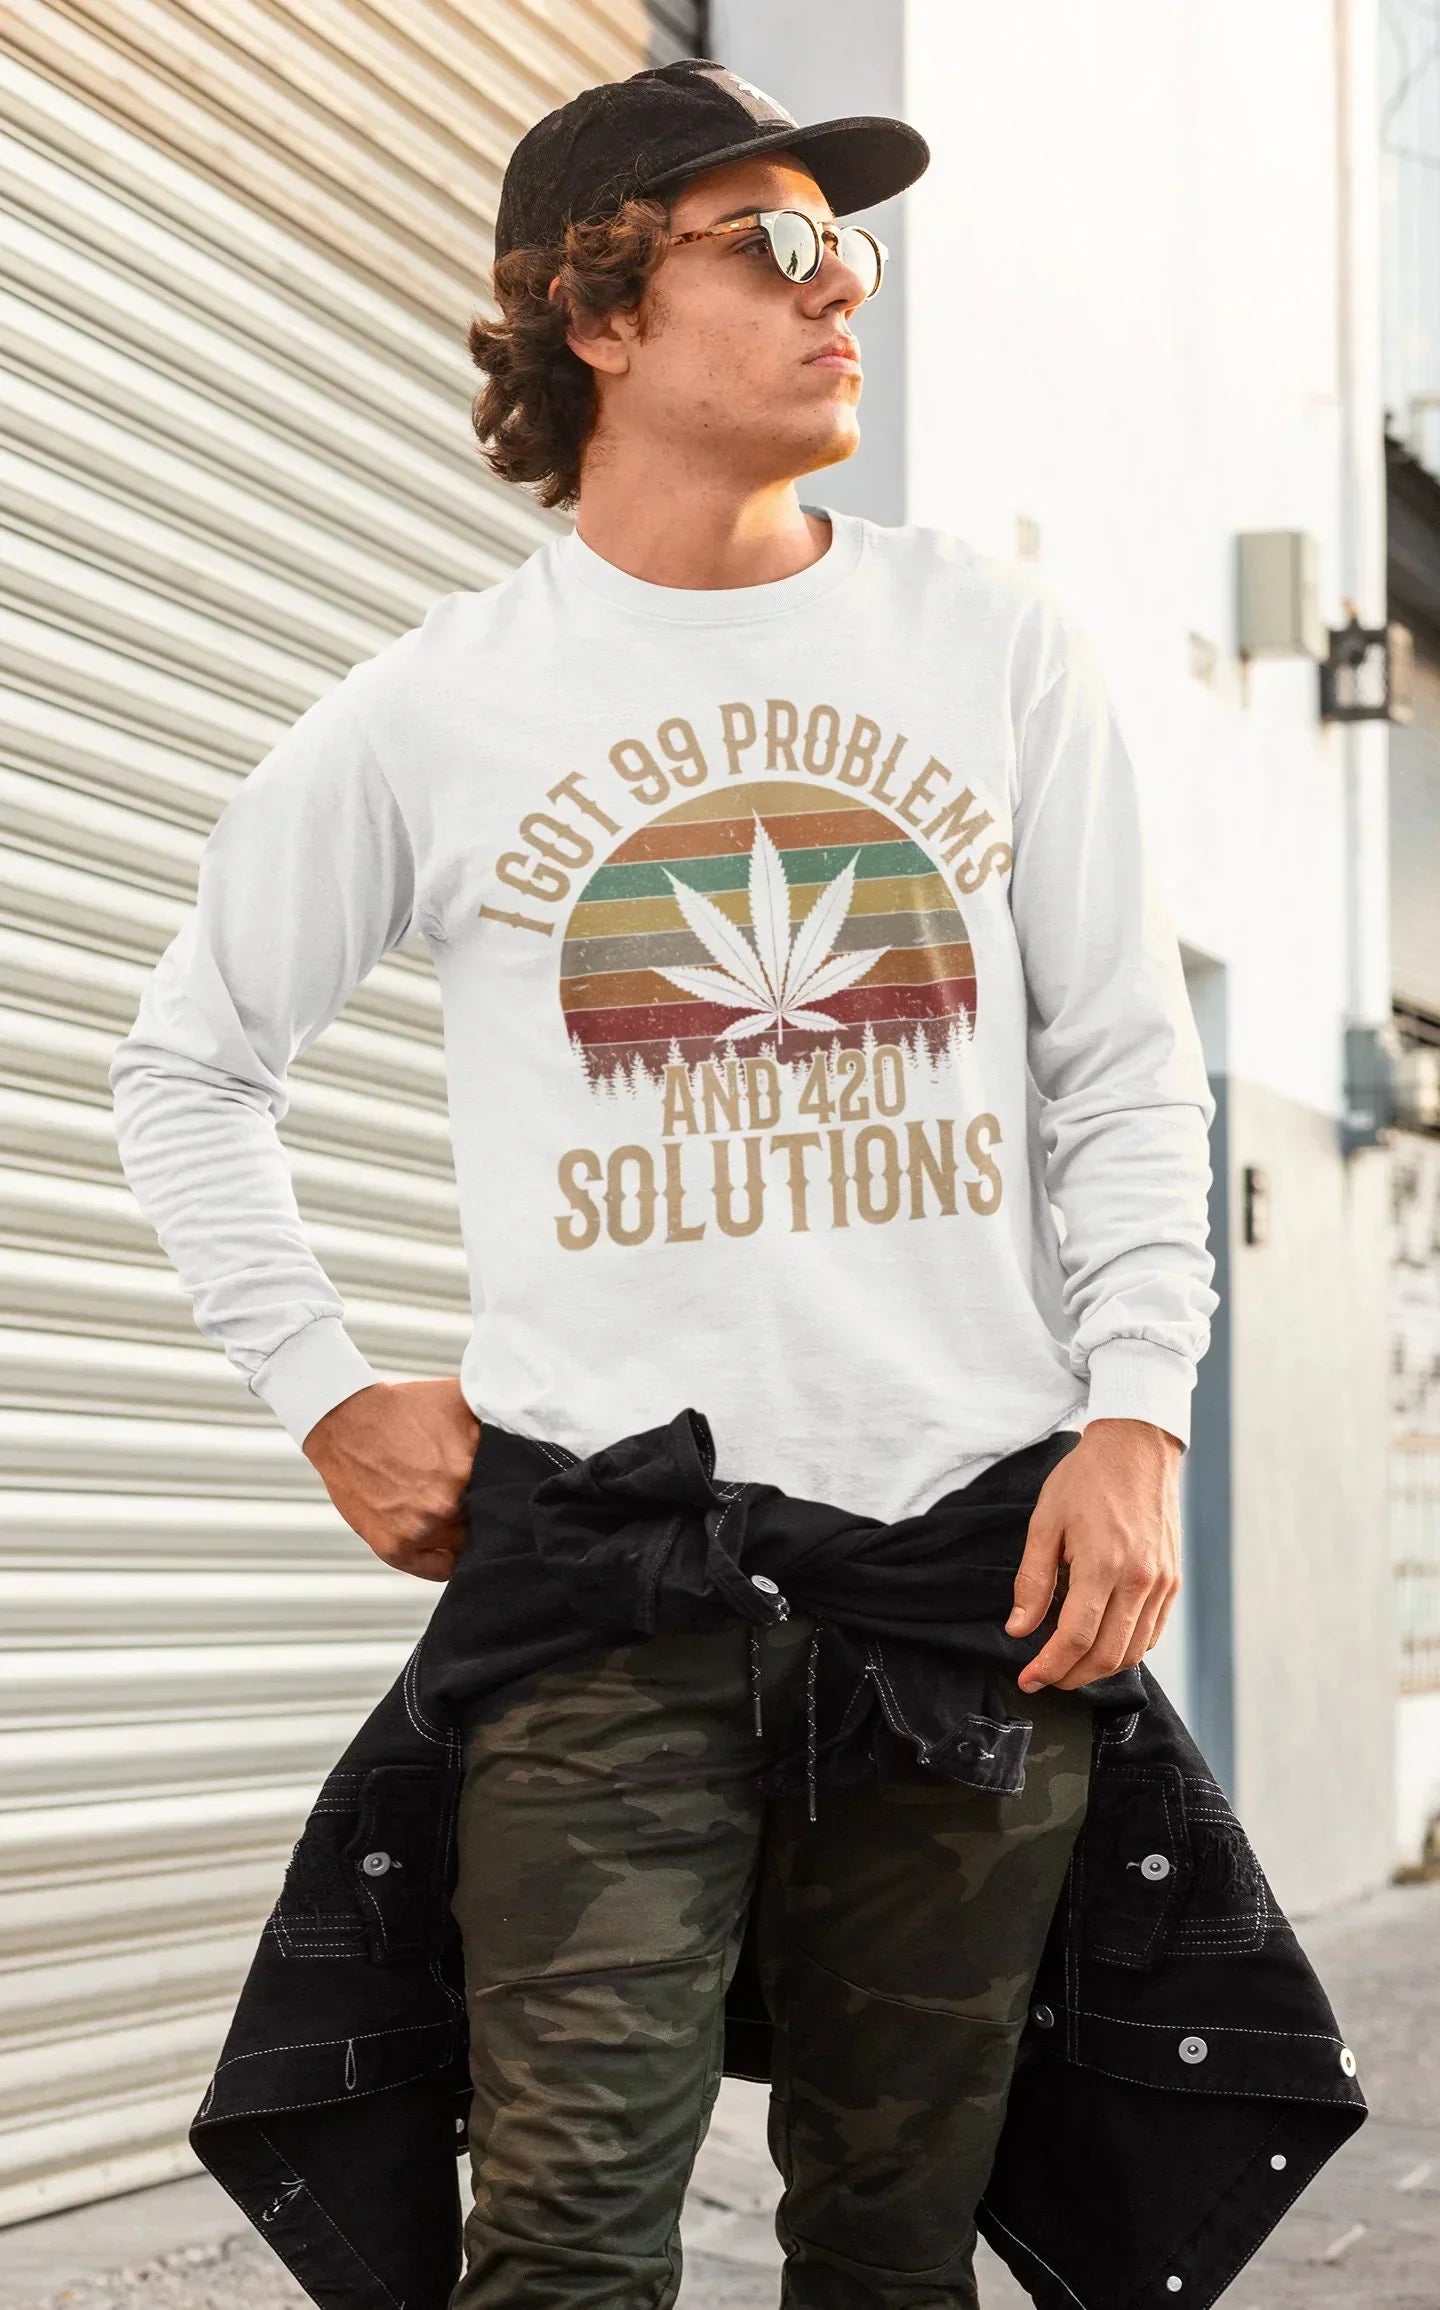 I Got 99 Problems and 420 Solutions Stoner Shirt